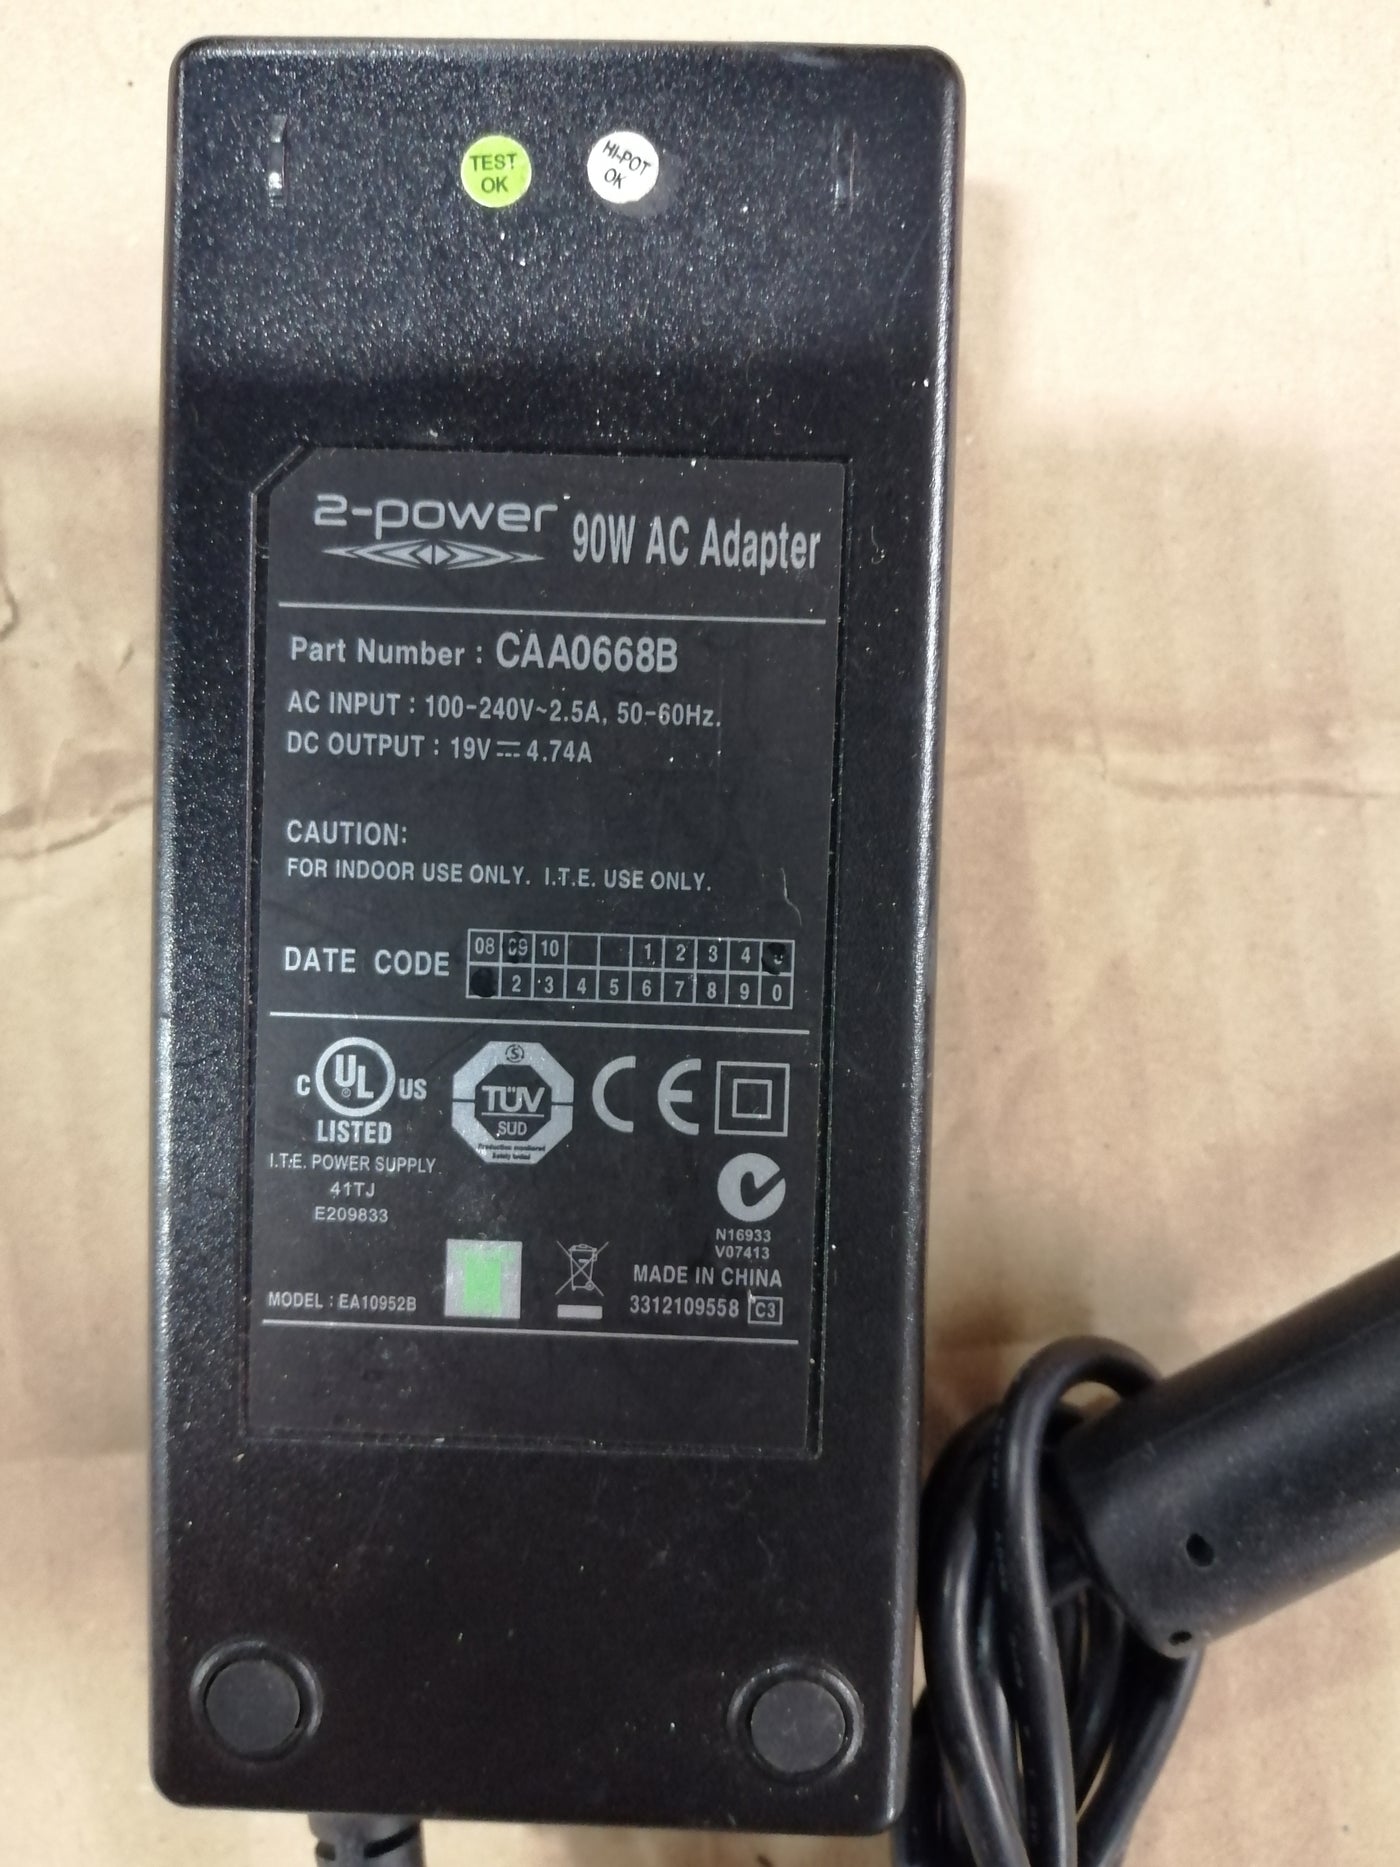 2 POWER 90W AC ADAPTER IN 240V 2.5A OUT 19V 4.74 ( CAA0668B USED )